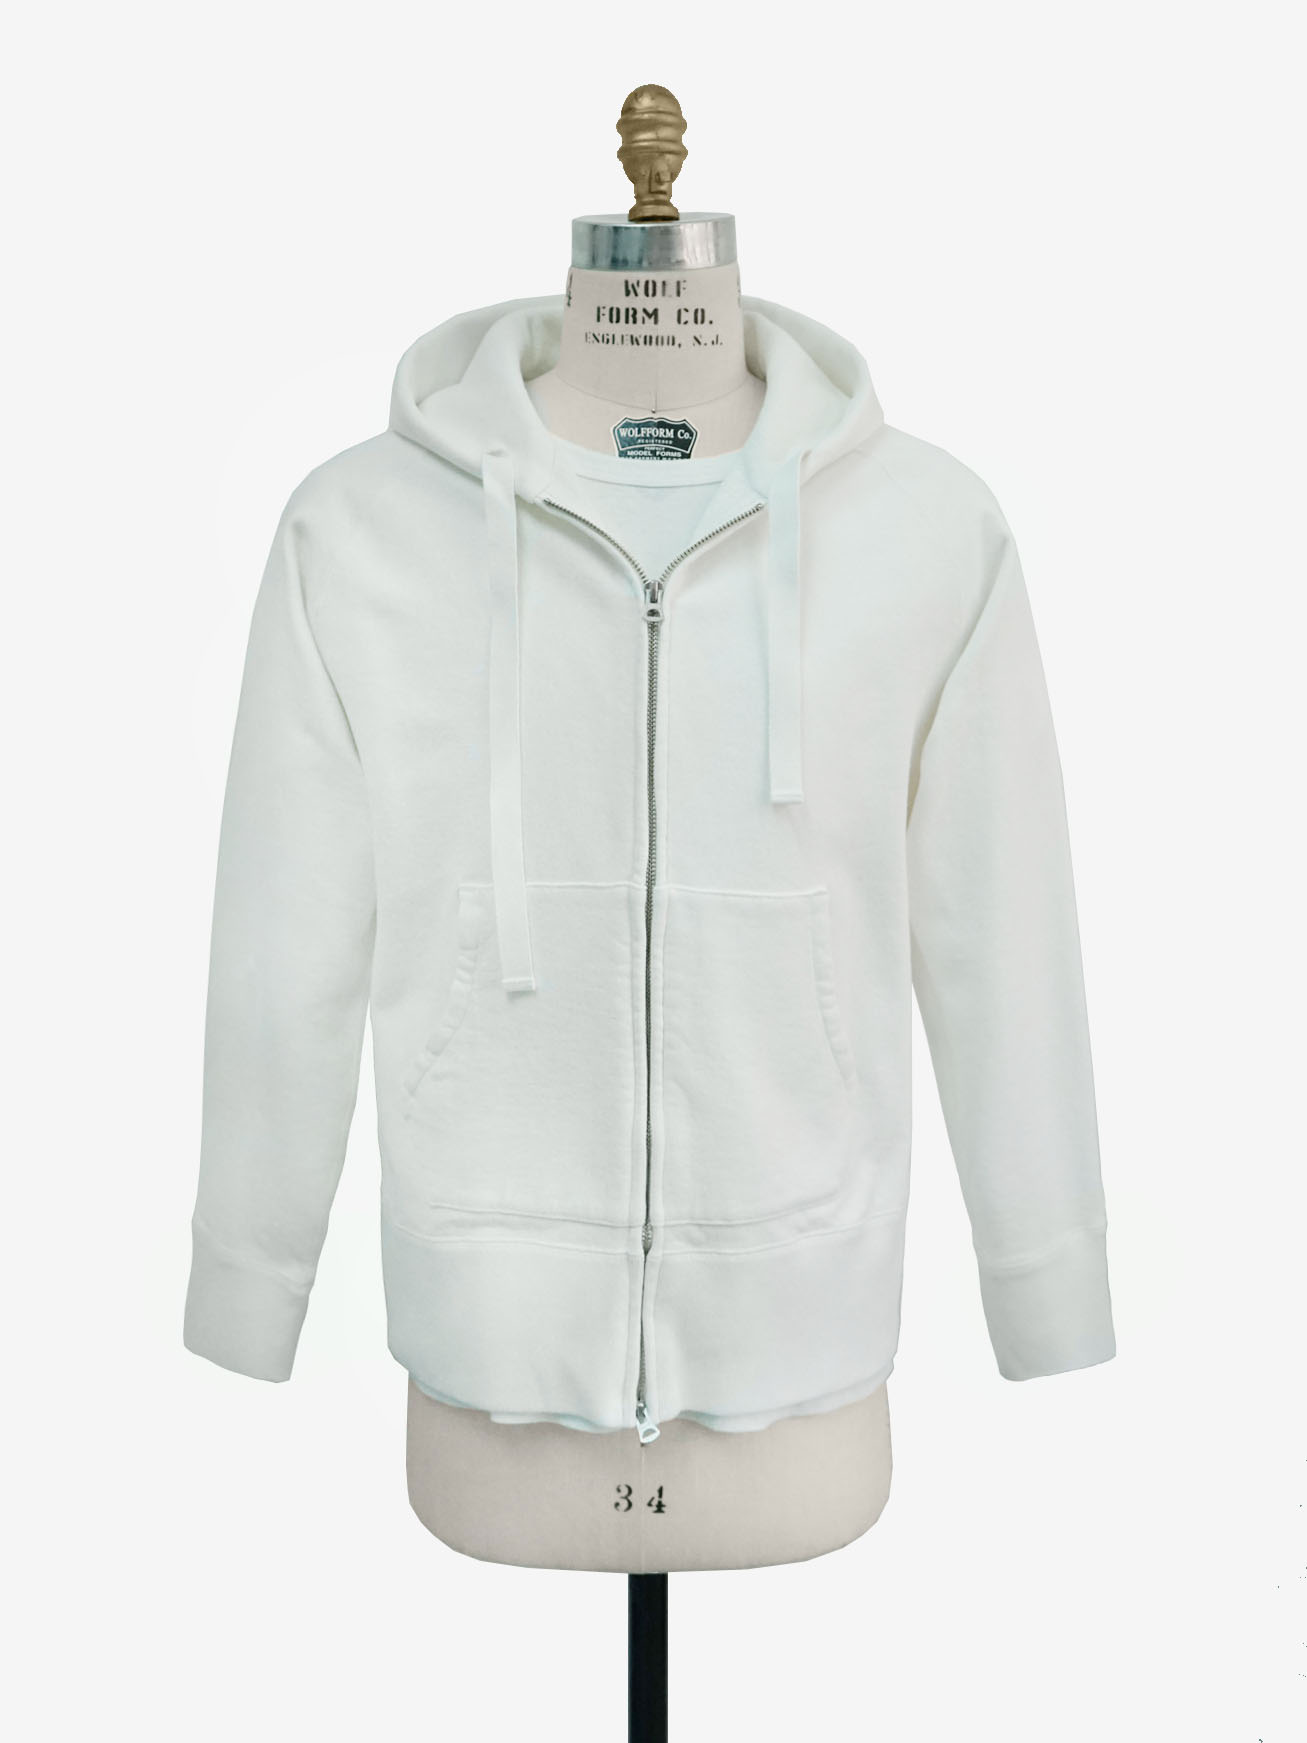 Off-White Vintage French Terry Zip Up Hoodie – JBB*